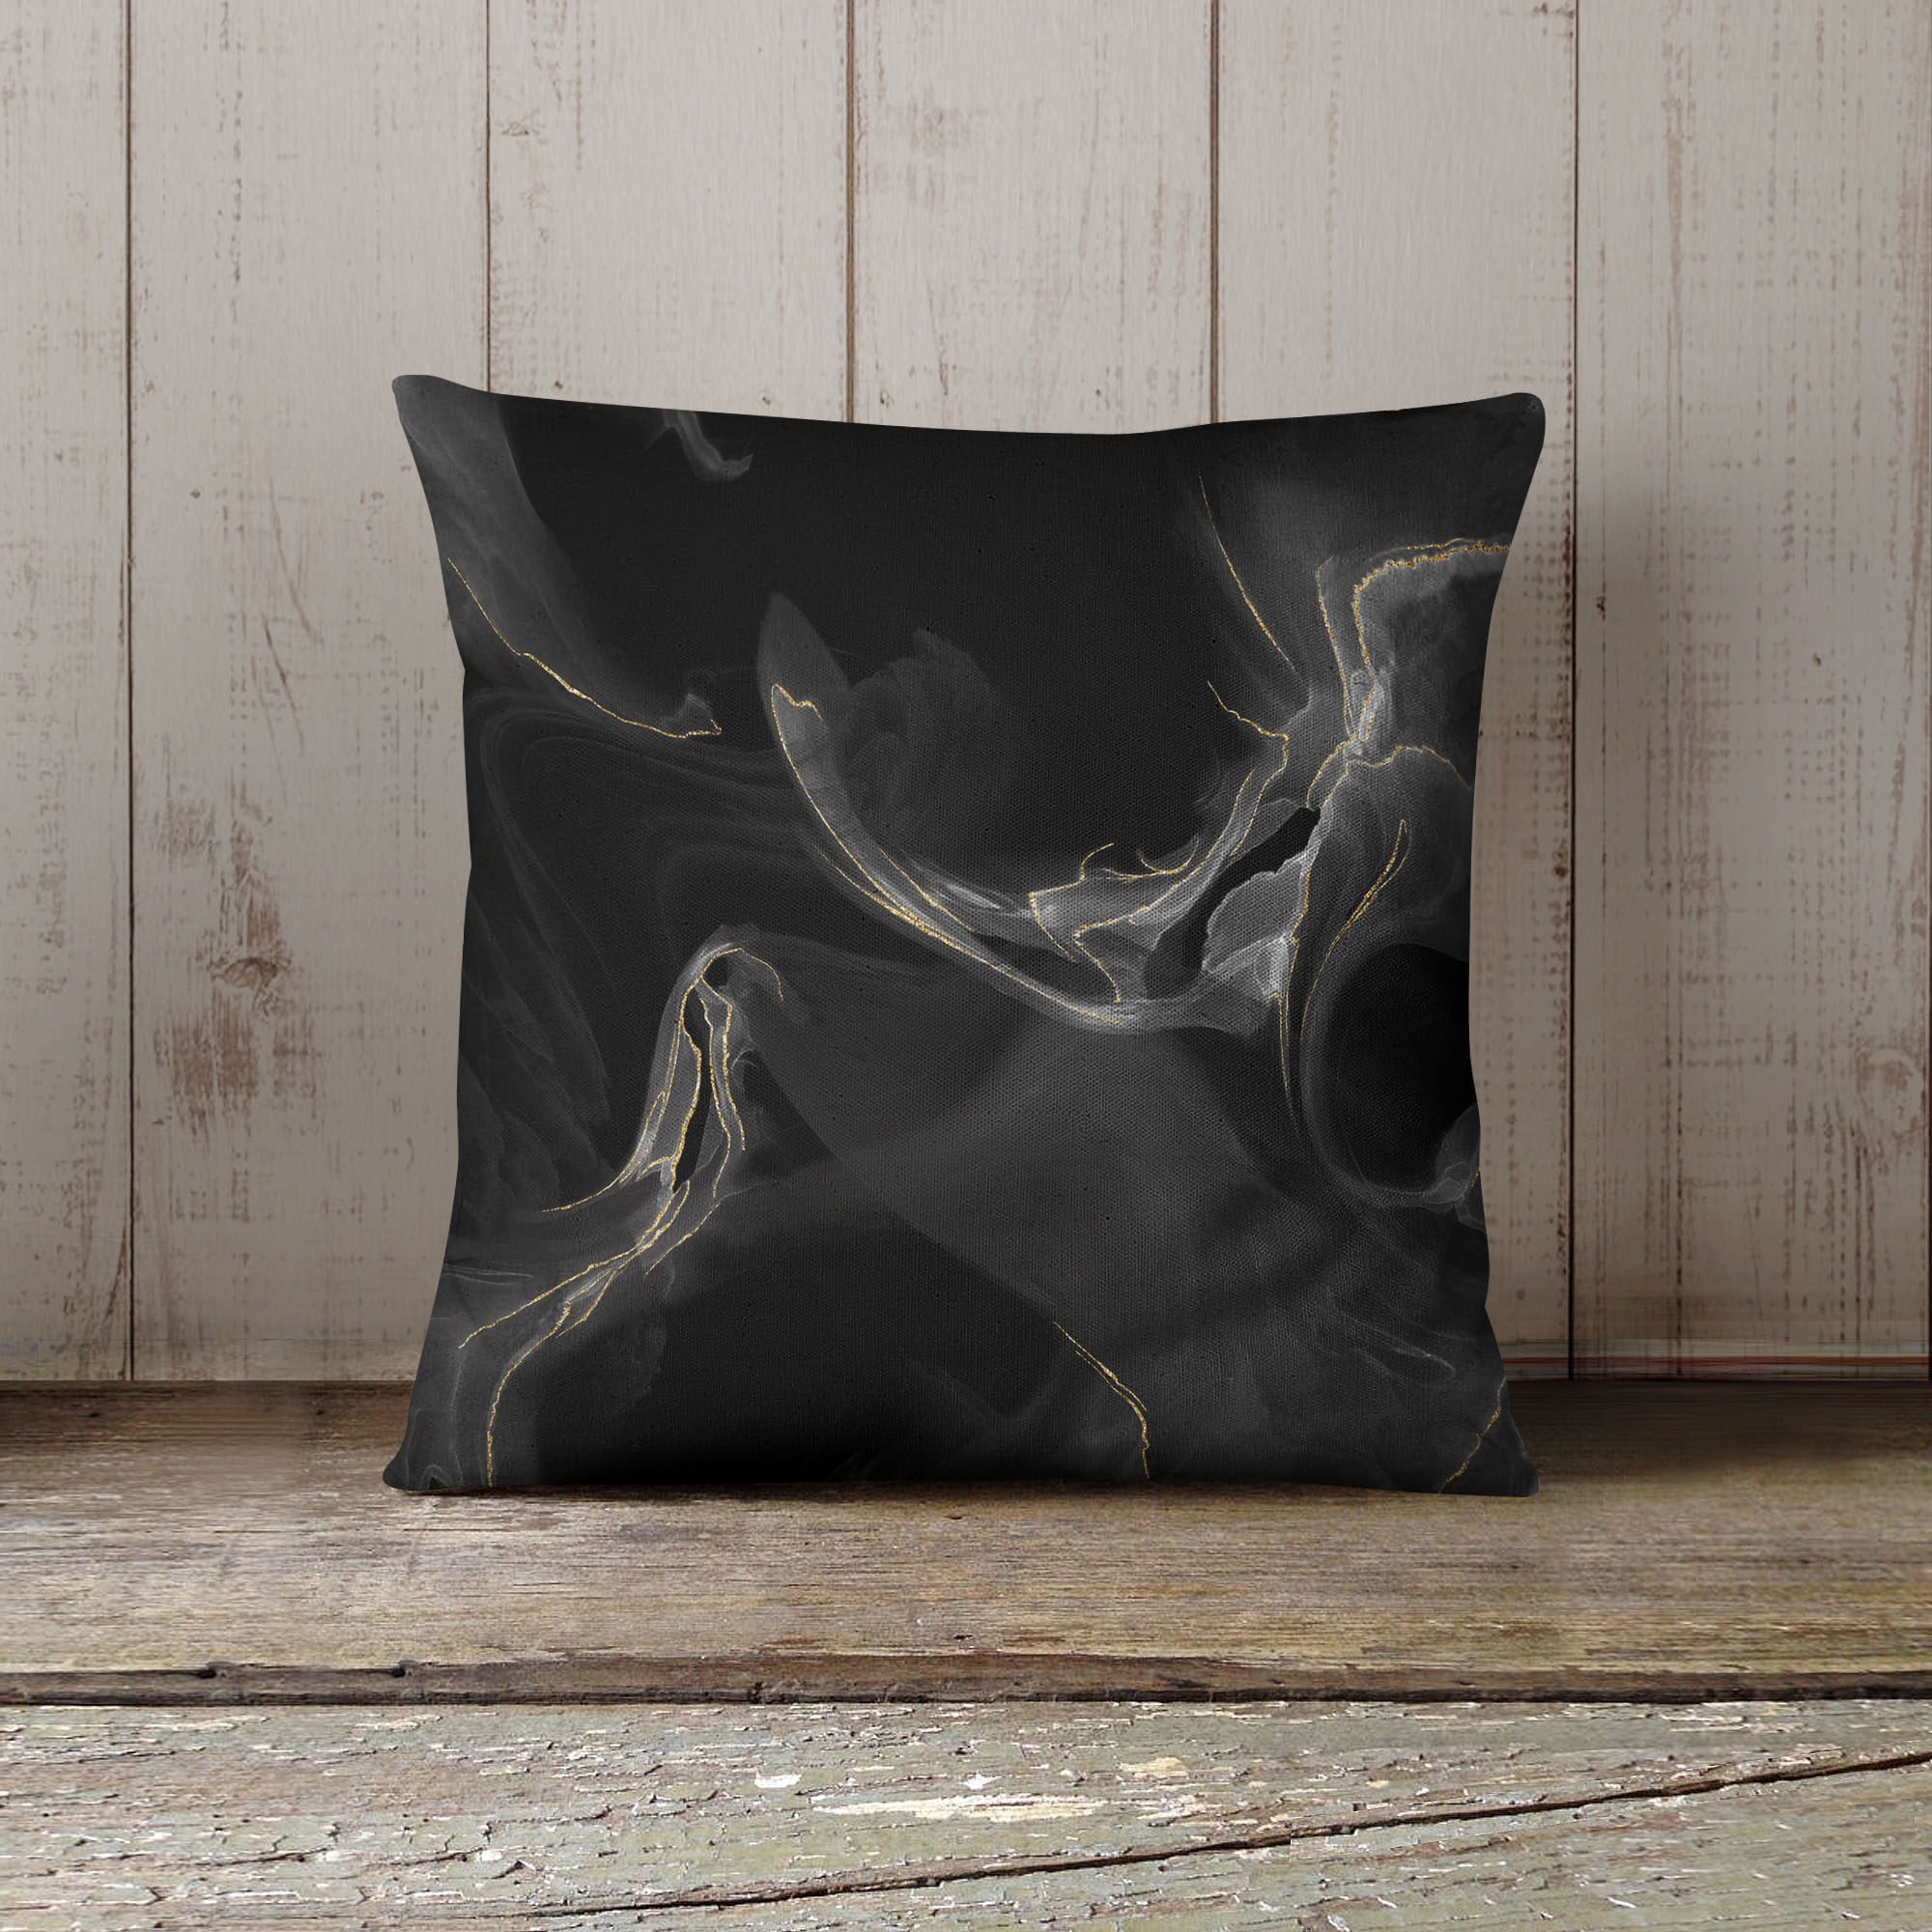 Marble Black Outdoor Pillow by Kavka Designs - image 2 of 5